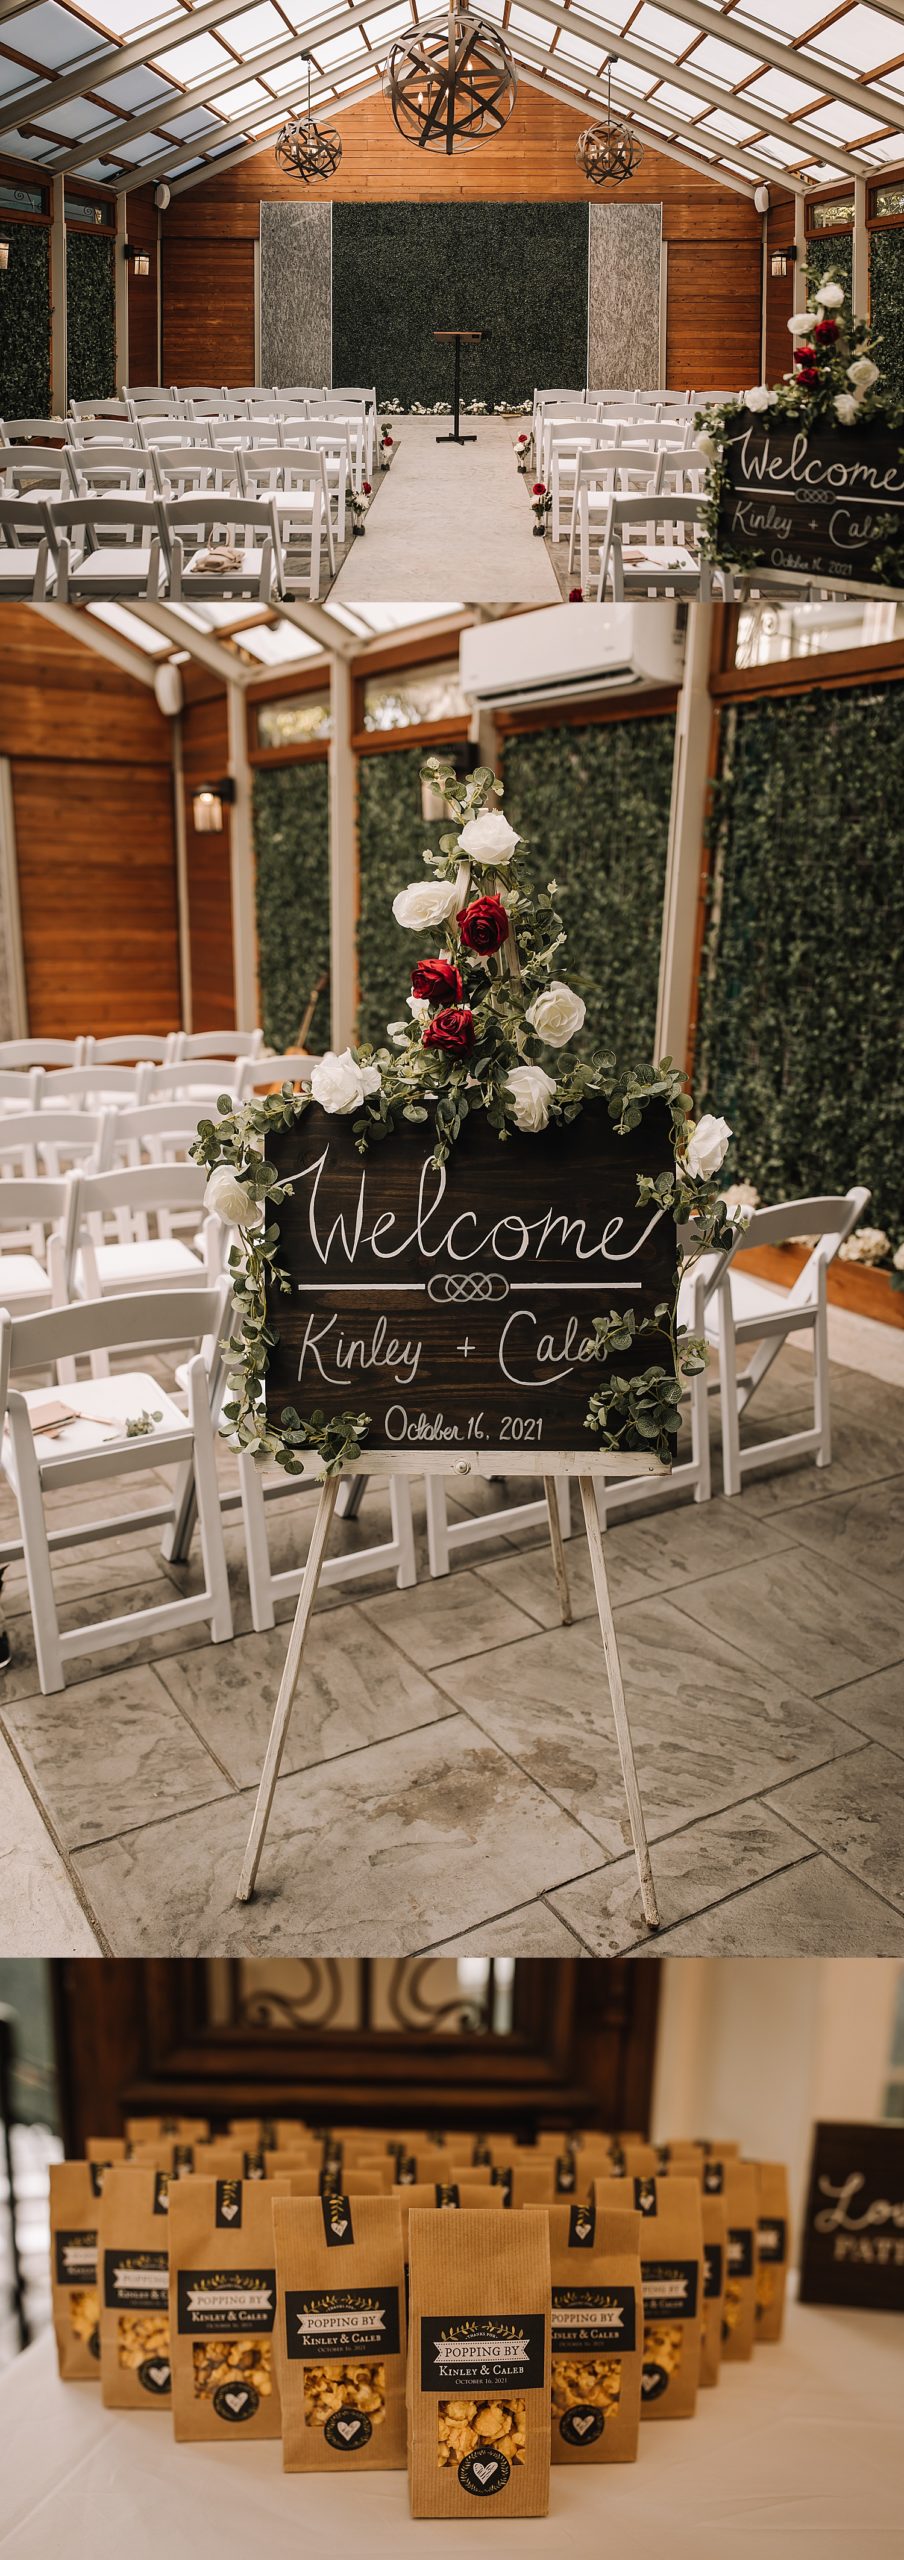 Ceremony details with welcome sign and wedding florals to decorate